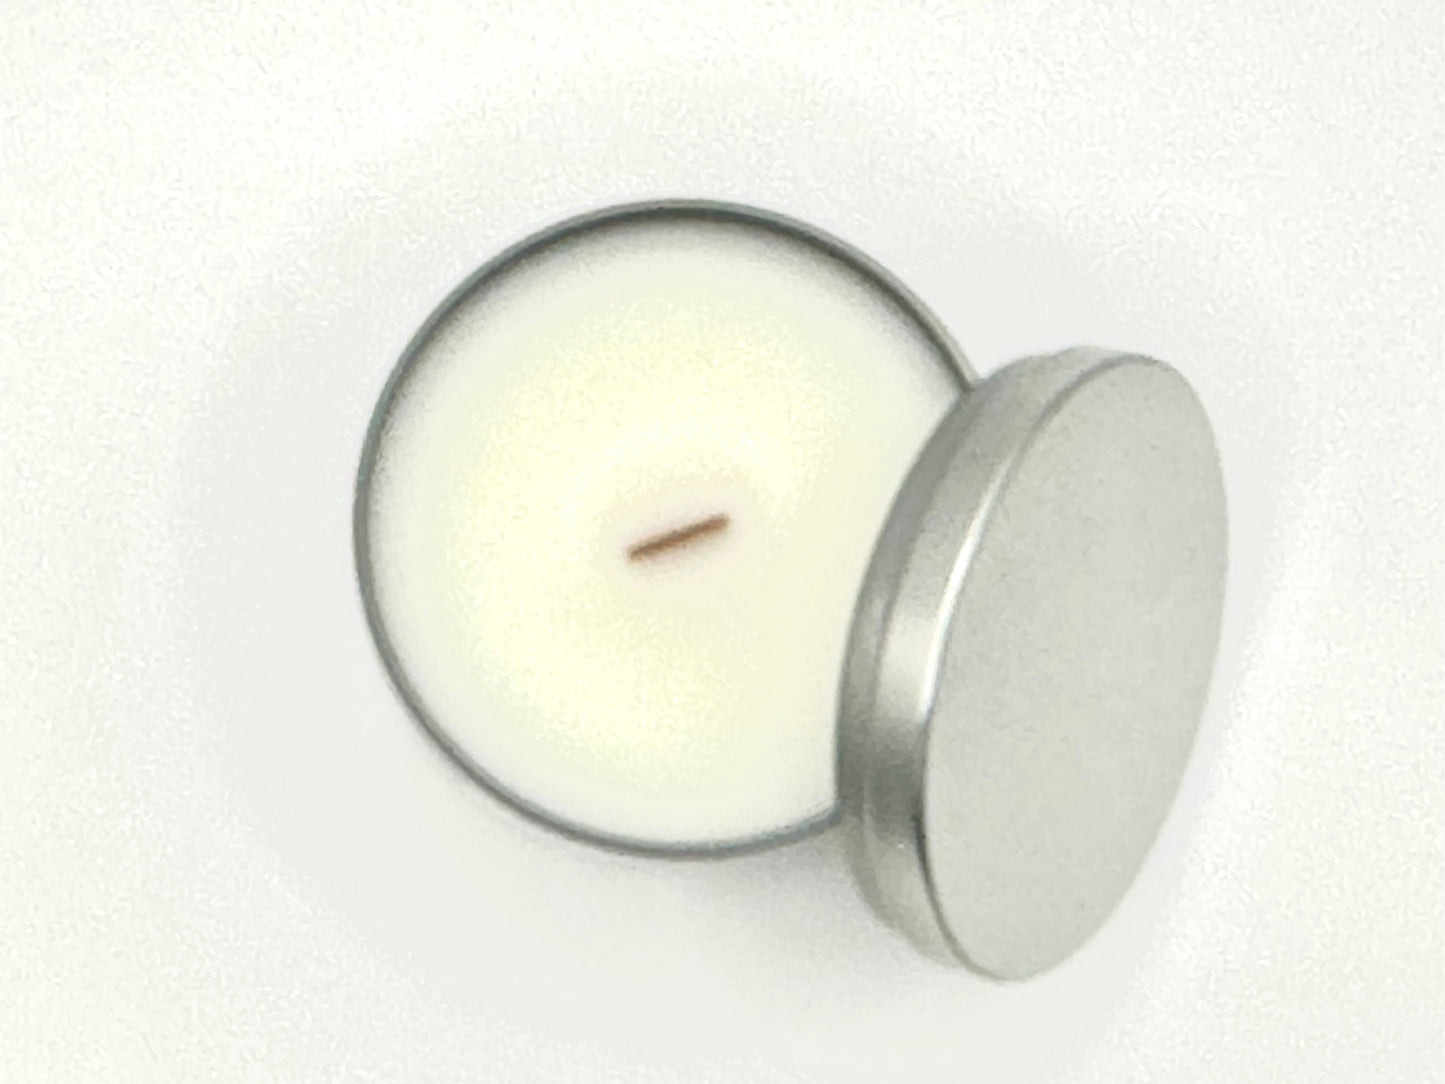 Sweater Weather Scented Candle